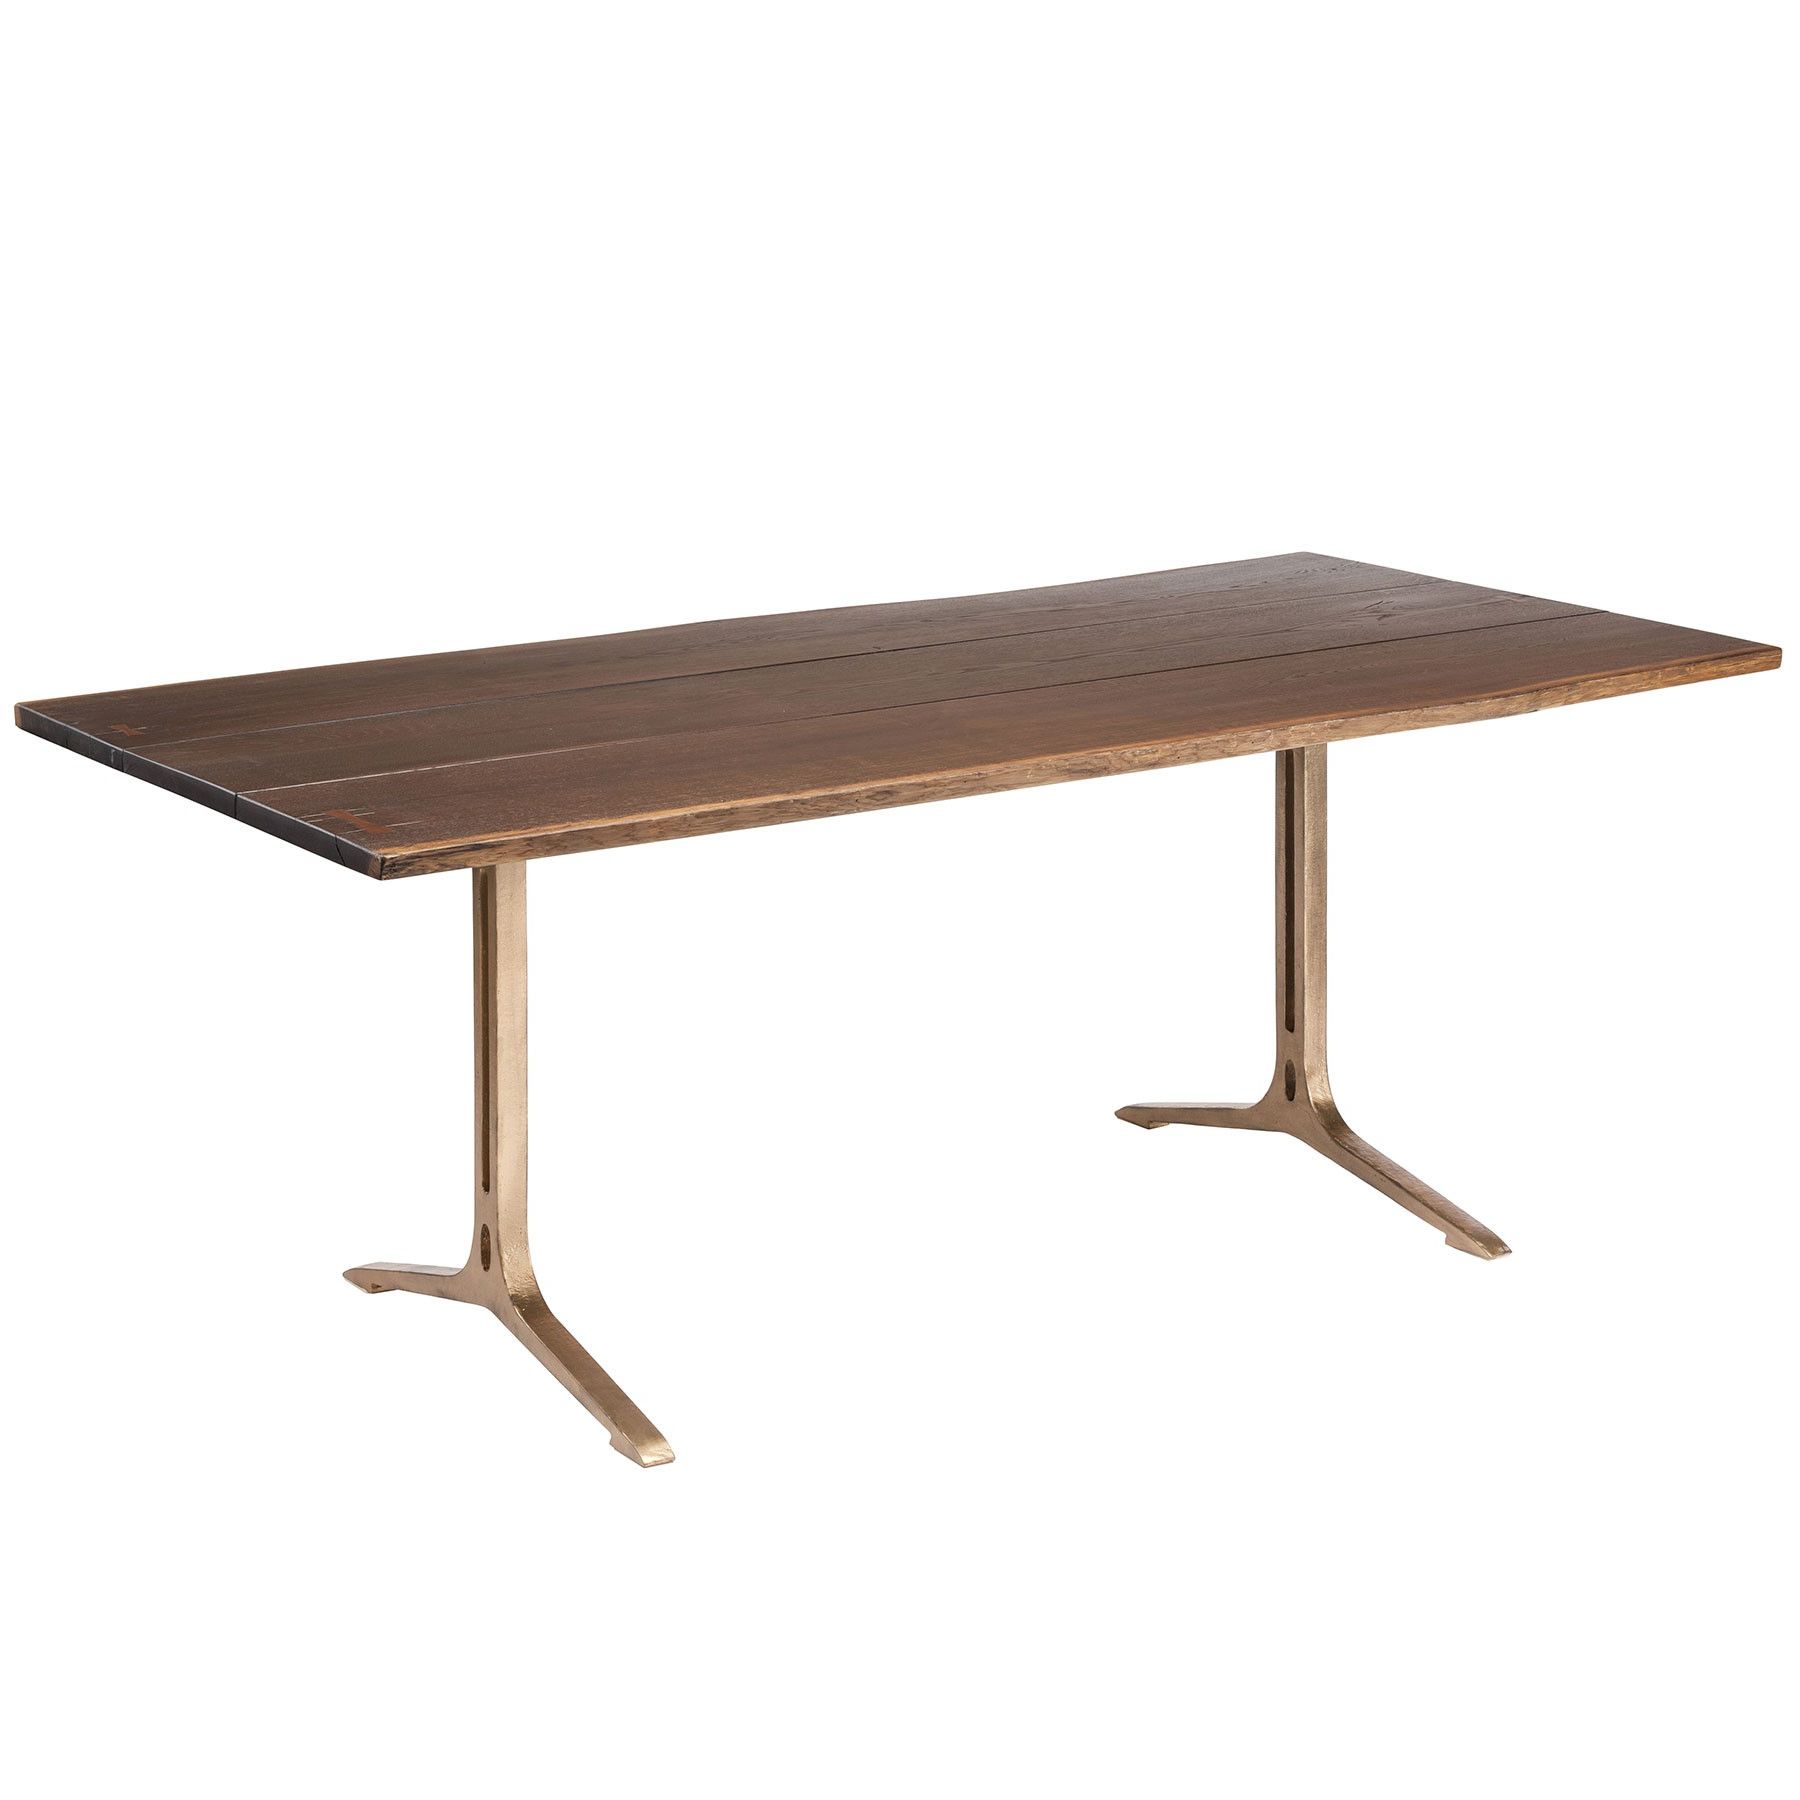 Dining Tables In Smoked/seared Oak Throughout Most Current Samara Dining Table – Seared Oak / Bronze (View 1 of 30)